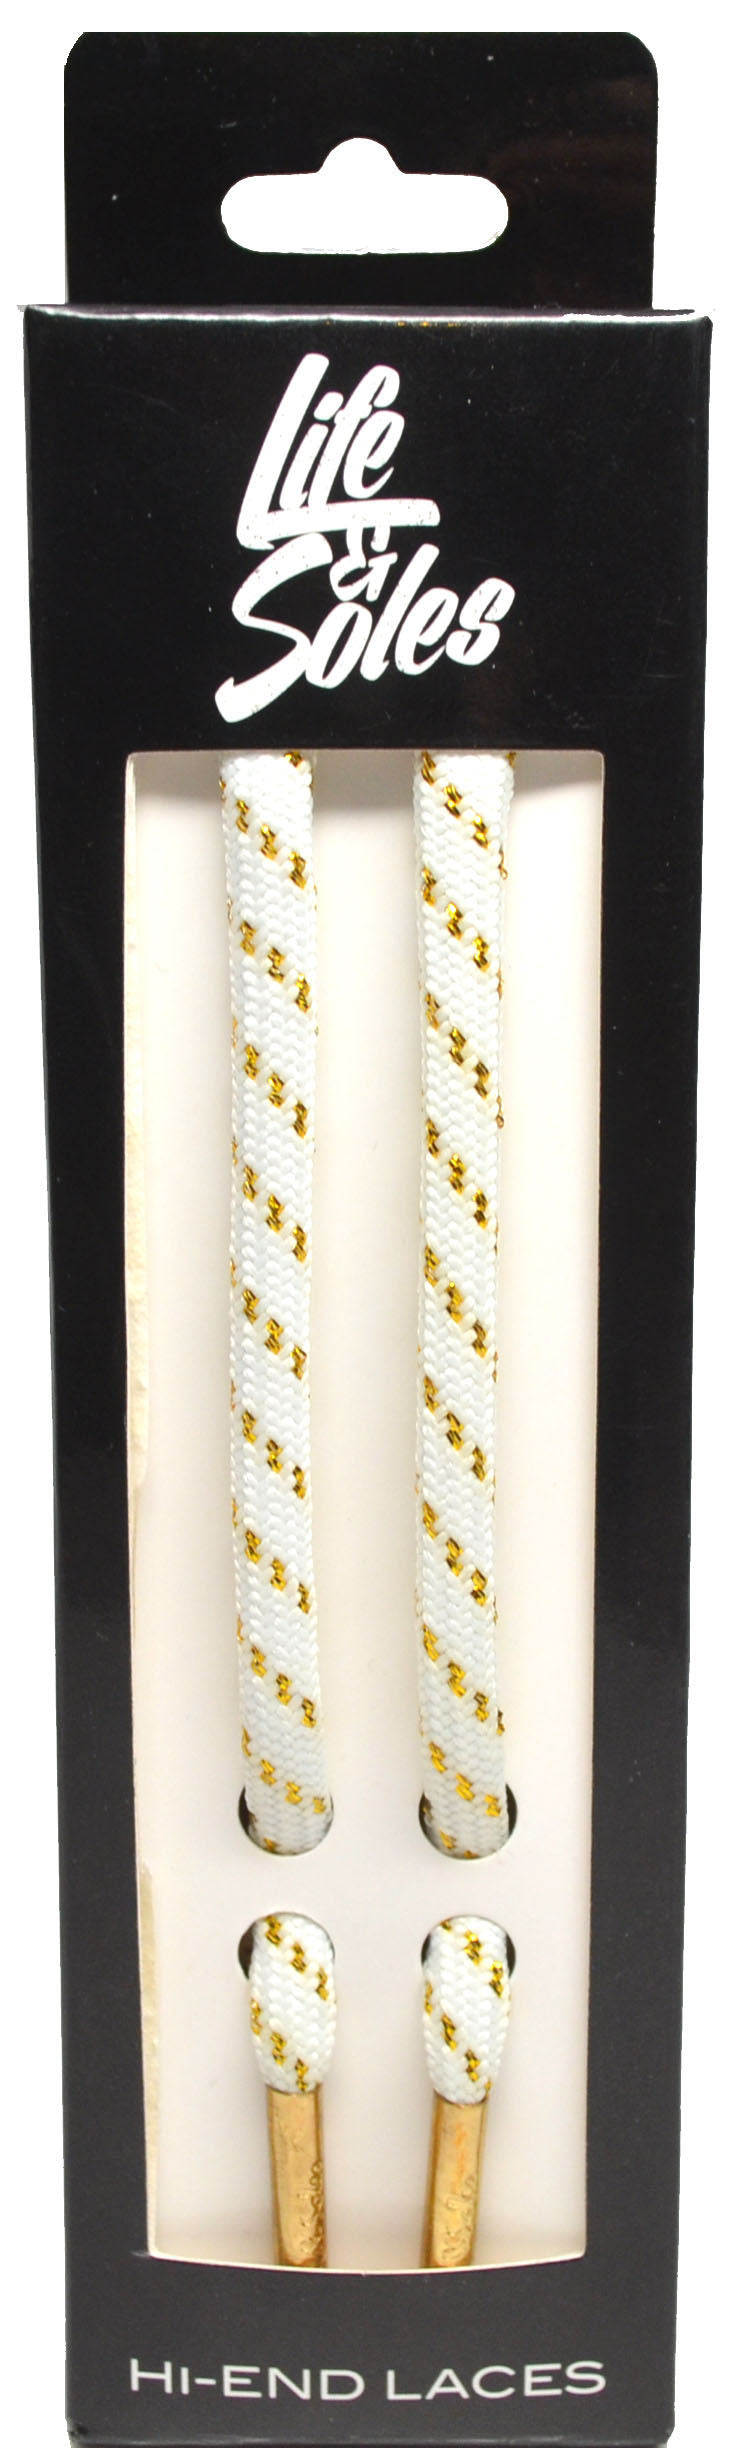 White & Gold Threaded Rope Shoelaces